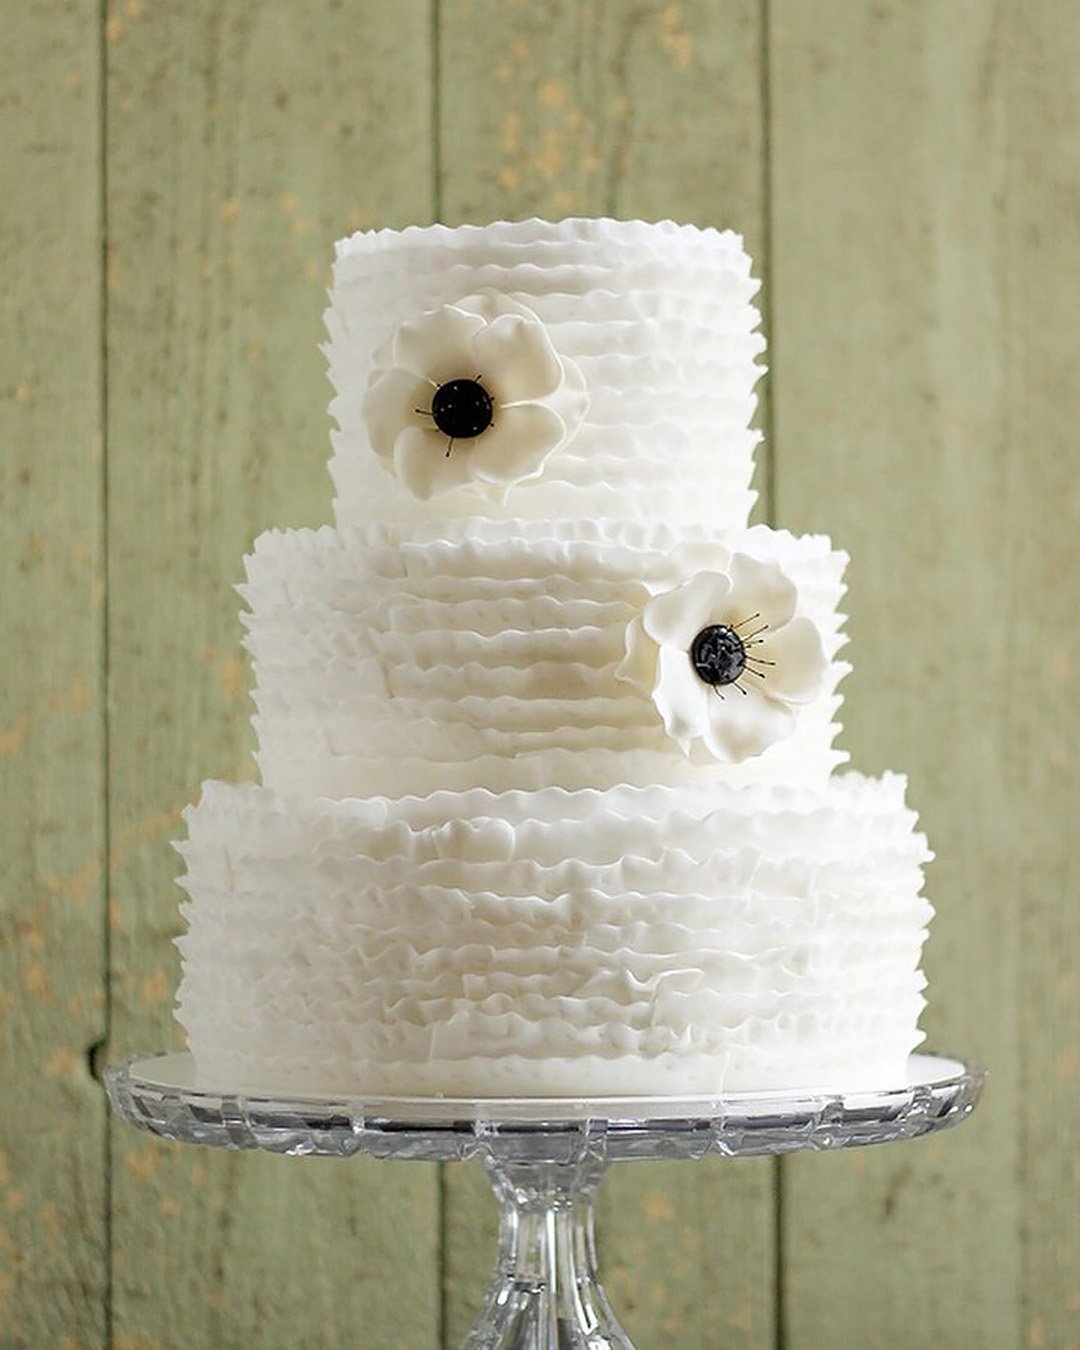 black and white wedding cakes with ruffles and flowers couturecakery